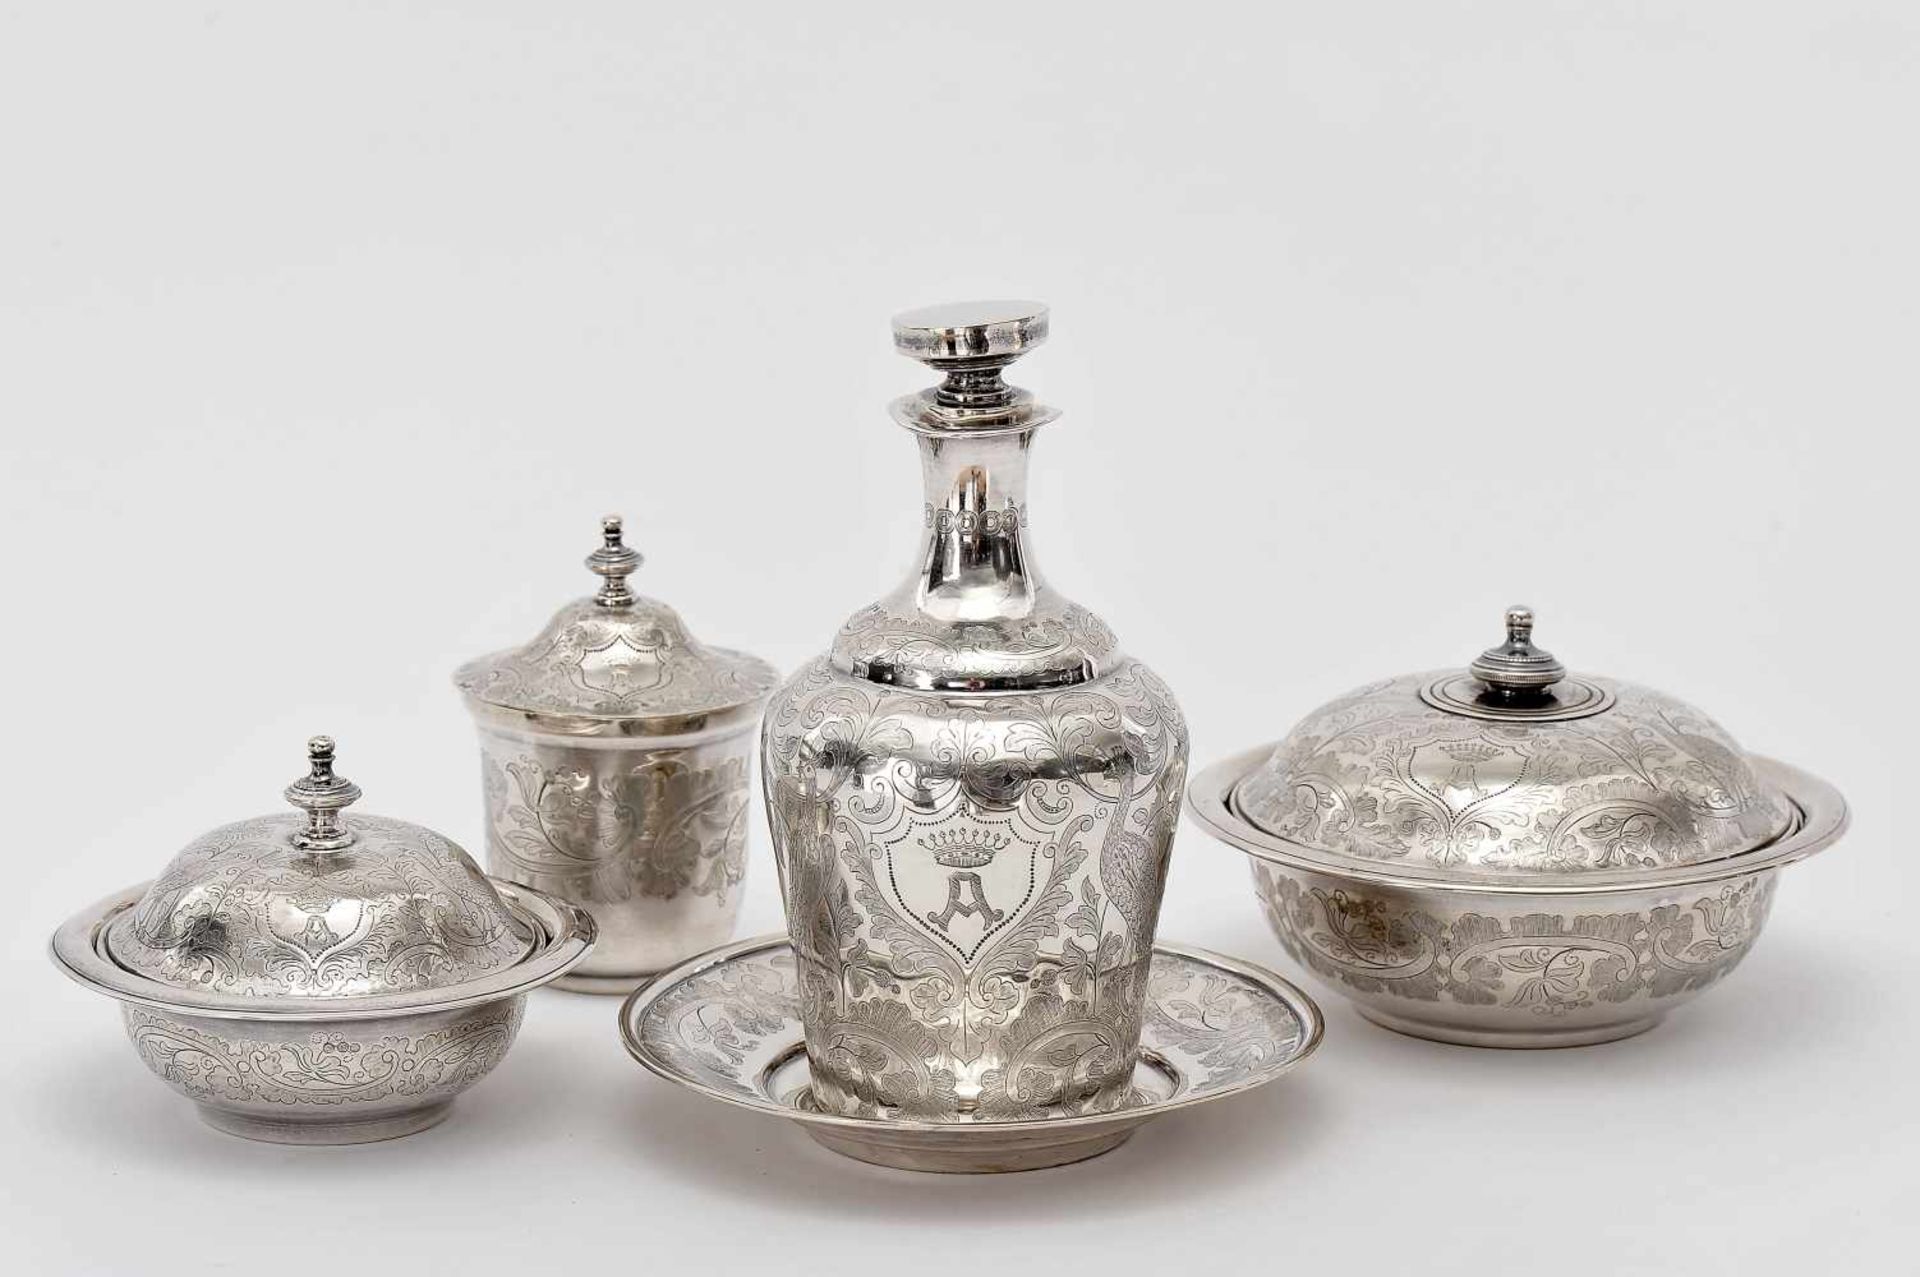 A Vanity Set, 833/1000 silver, consisting of three boxes and bottle with stand, engraved